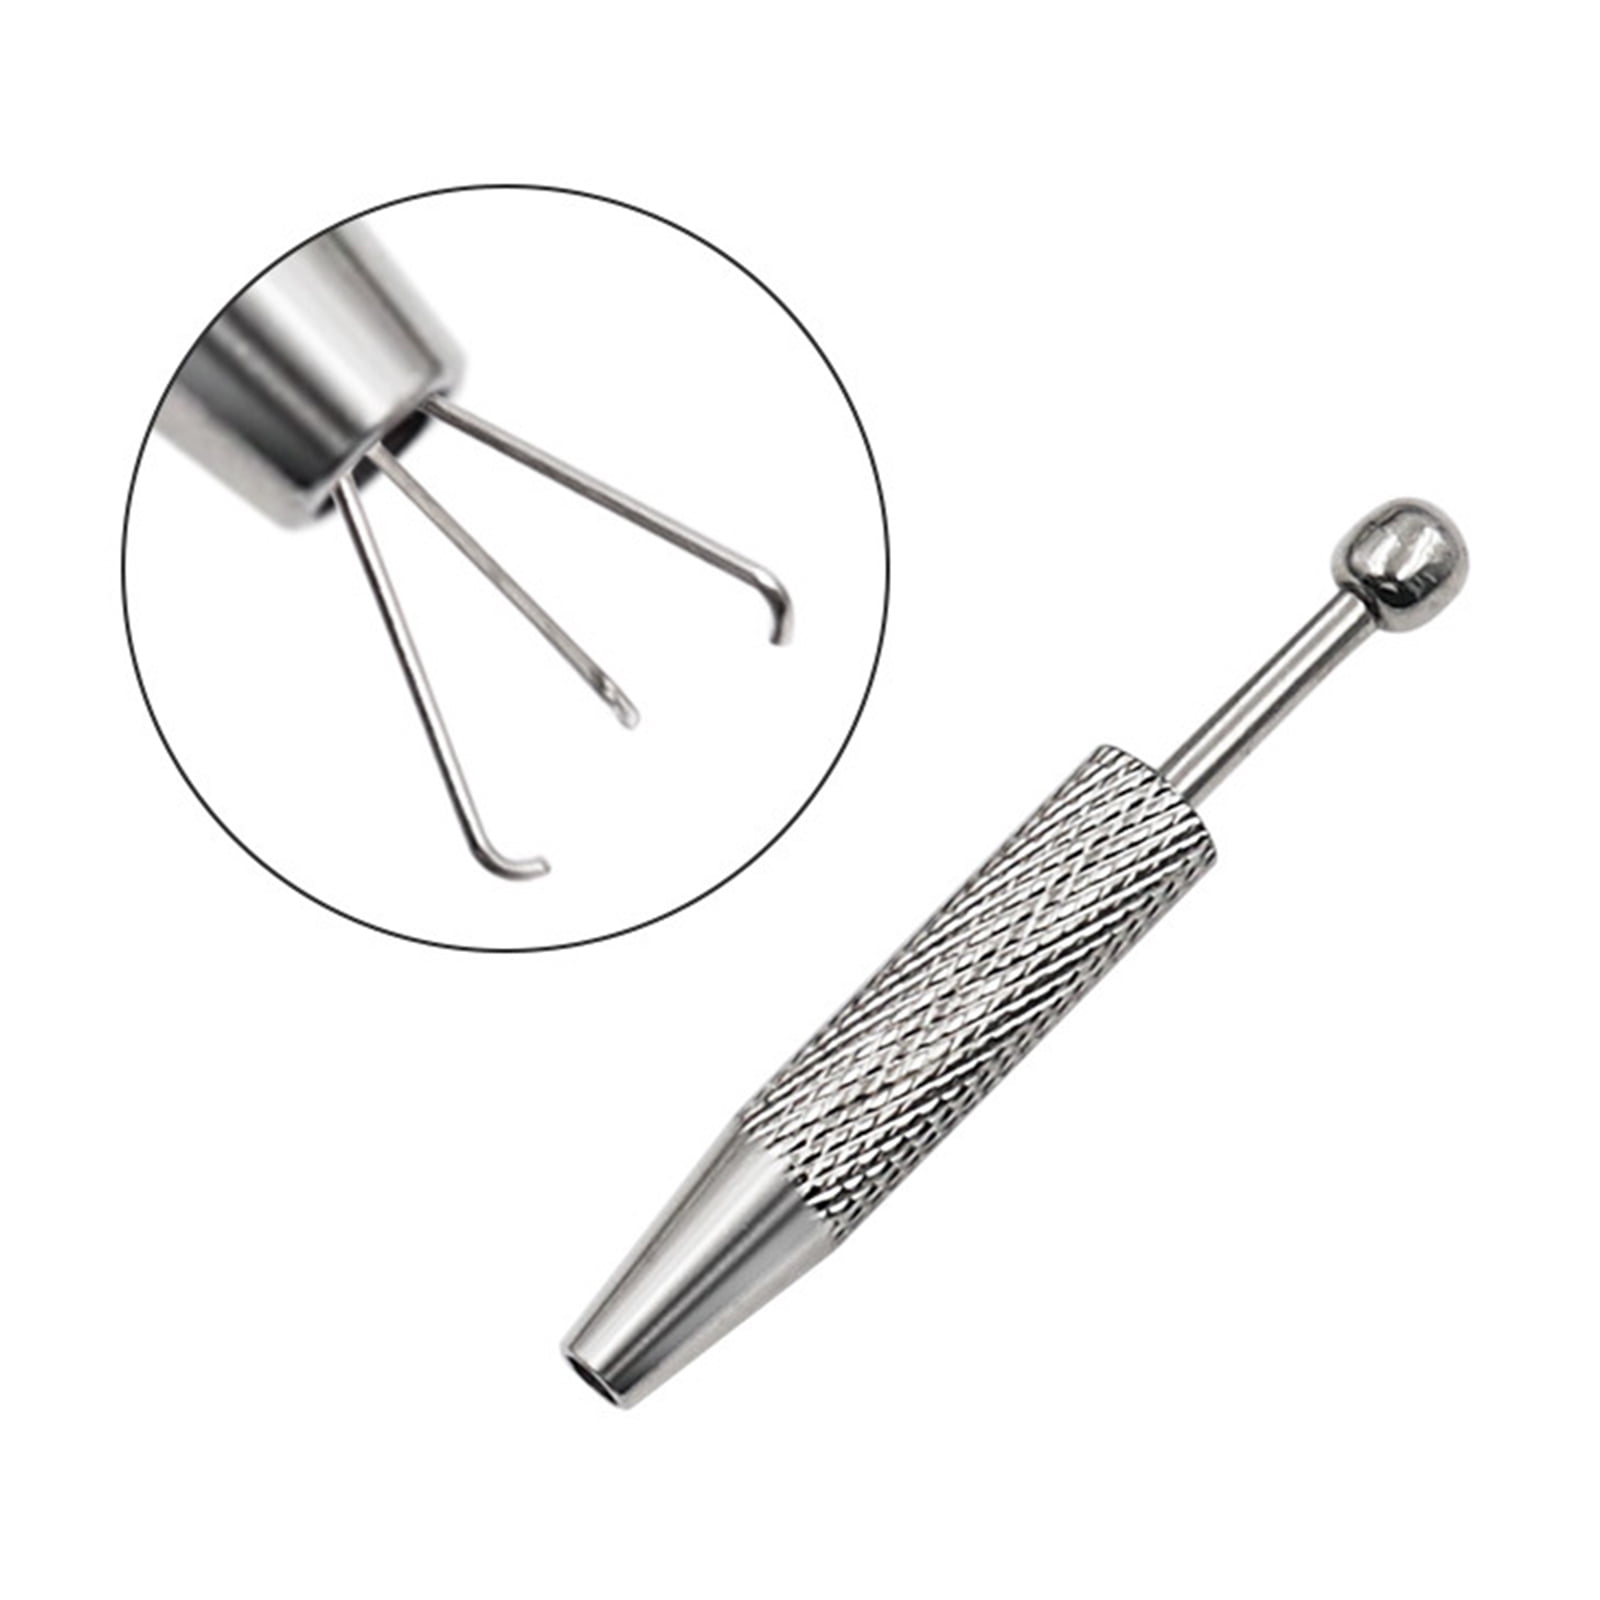 4-claw Piercing Ball Grabber Tool,pick-up, 4 Prongs Professional Surgical  Steel Push In Syringe Type Quad Prong For Small Parts Pickup, Grabber For  Ti